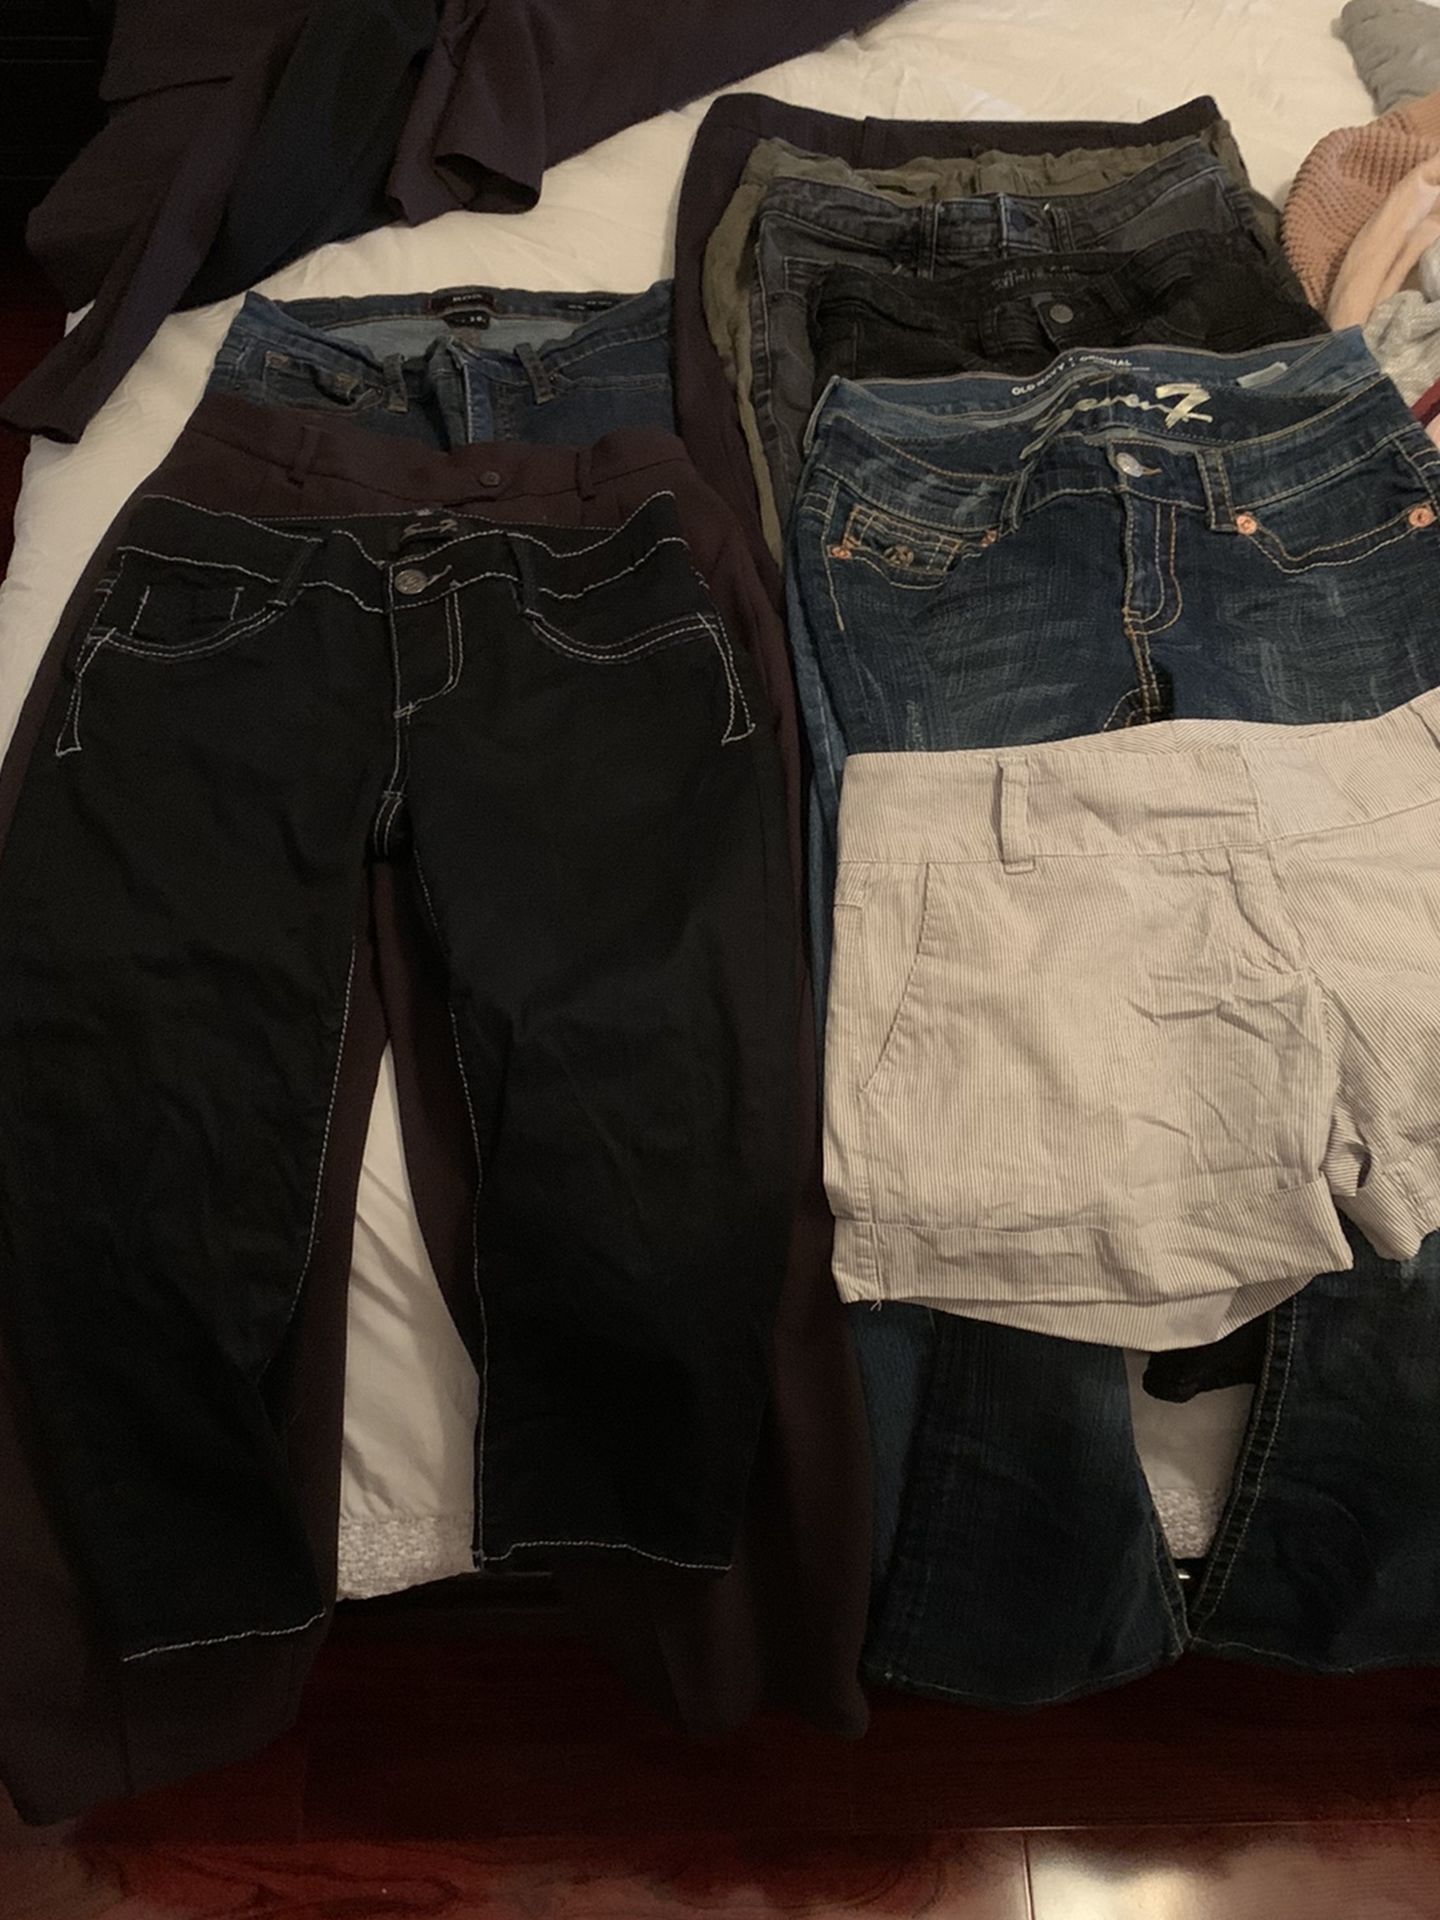 Junior / Women Jeans -Clothes - Size Small, 4, 27, 6/28 - $1 a Piece, You Pick The Pieces You Like